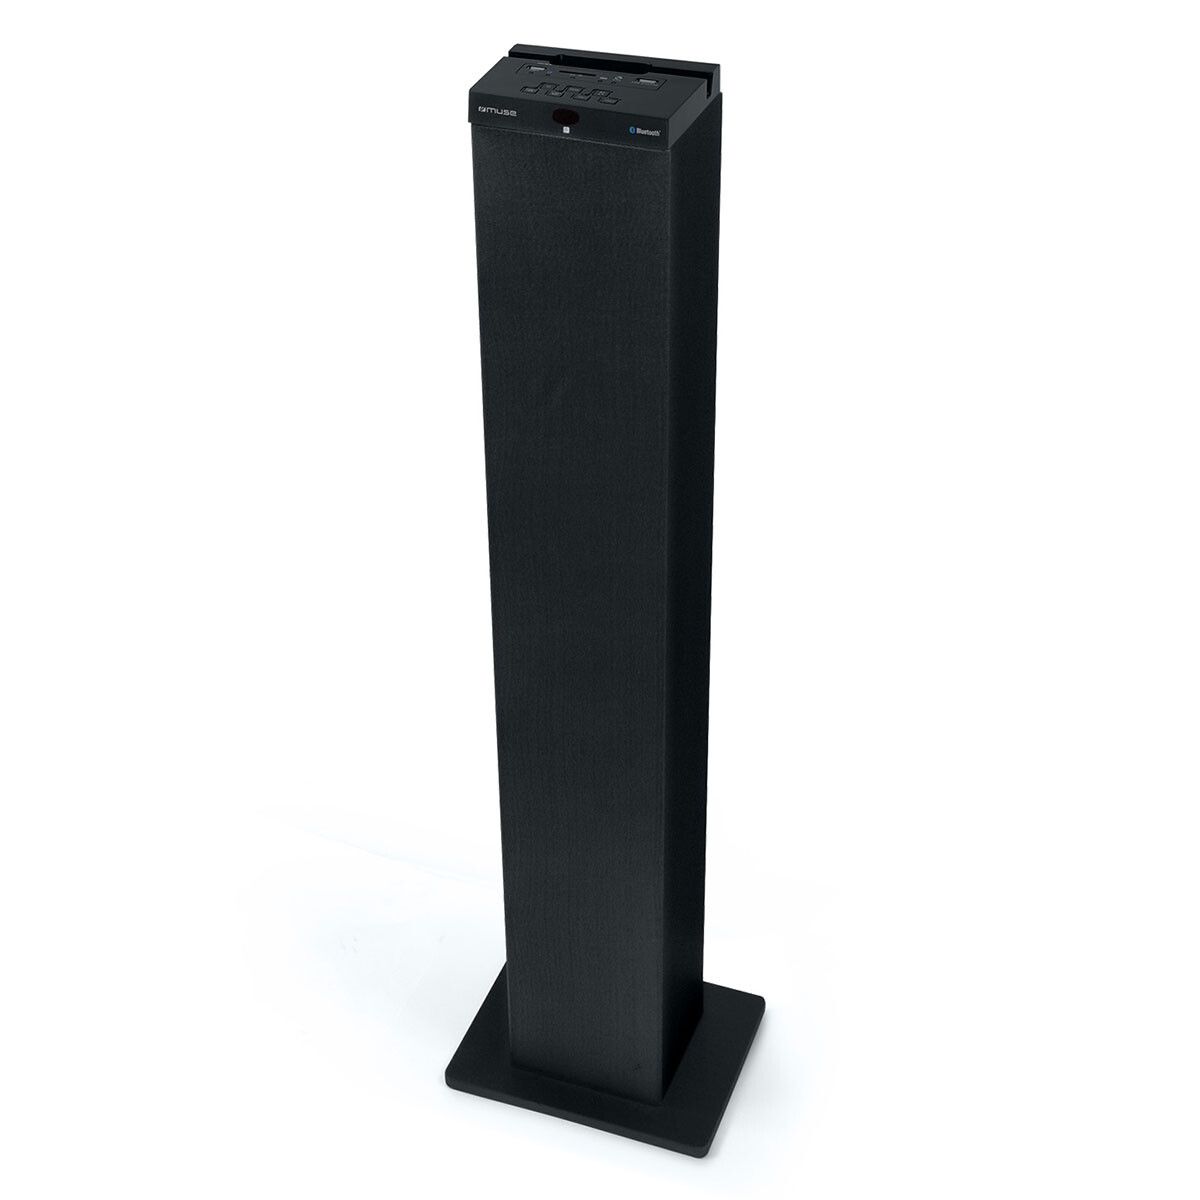 REPRODUCTOR BT MUSE M1250BT FORMATO TORRE 